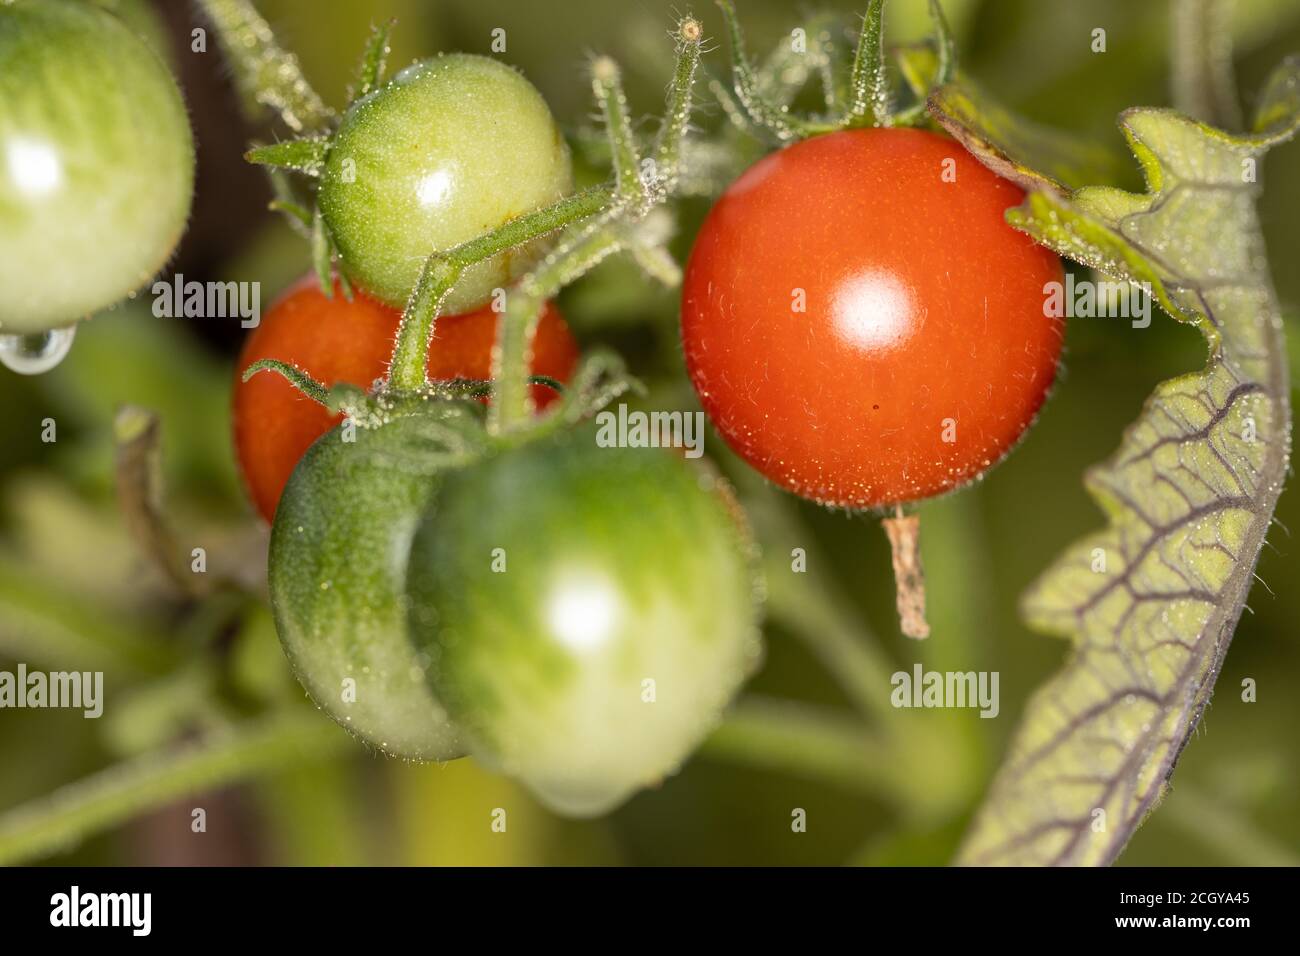 Green and red tomatoes on the vine in home garden Stock Photo